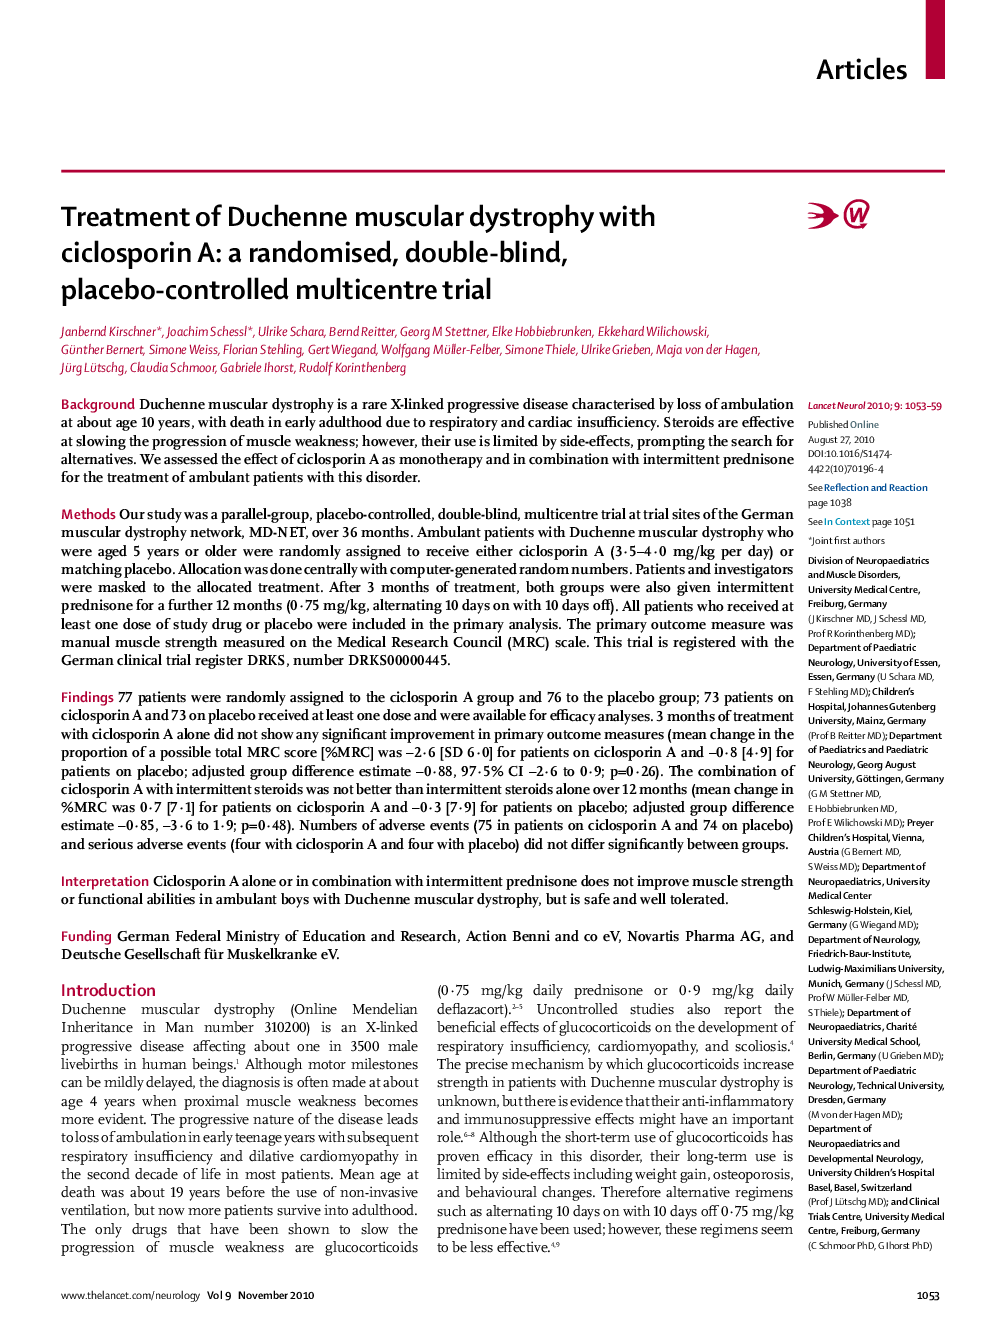 Treatment of Duchenne muscular dystrophy with ciclosporin A: a randomised, double-blind, placebo-controlled multicentre trial